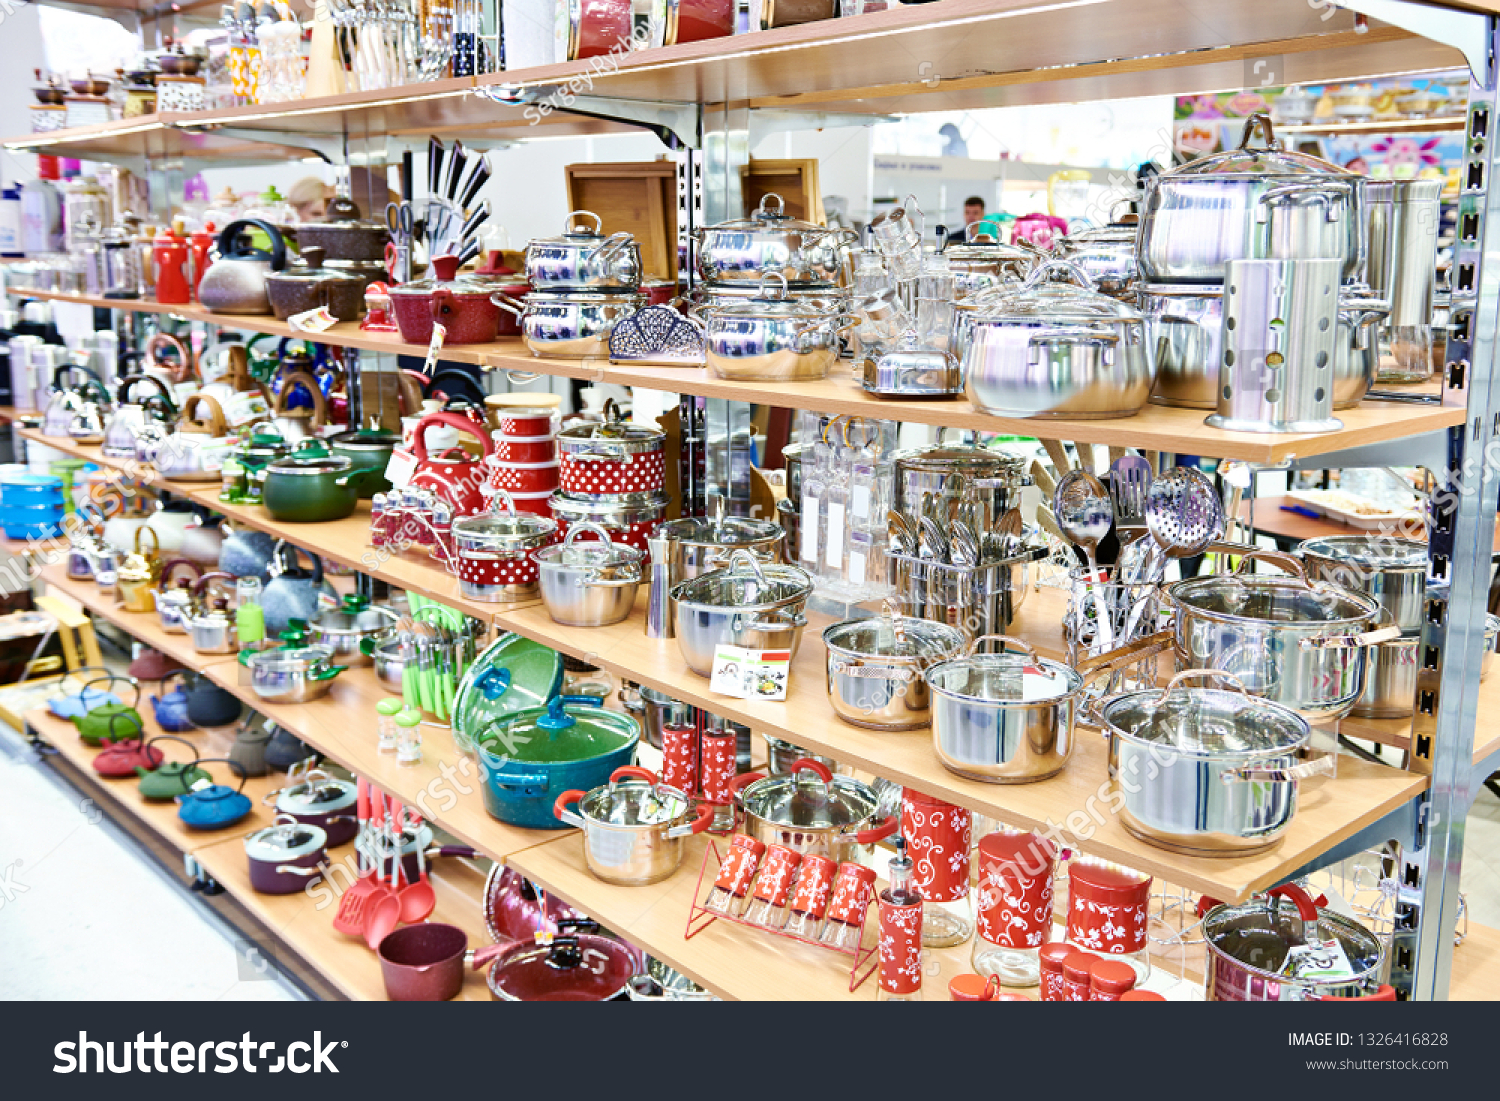 Kitchenware in the household goods store #1326416828